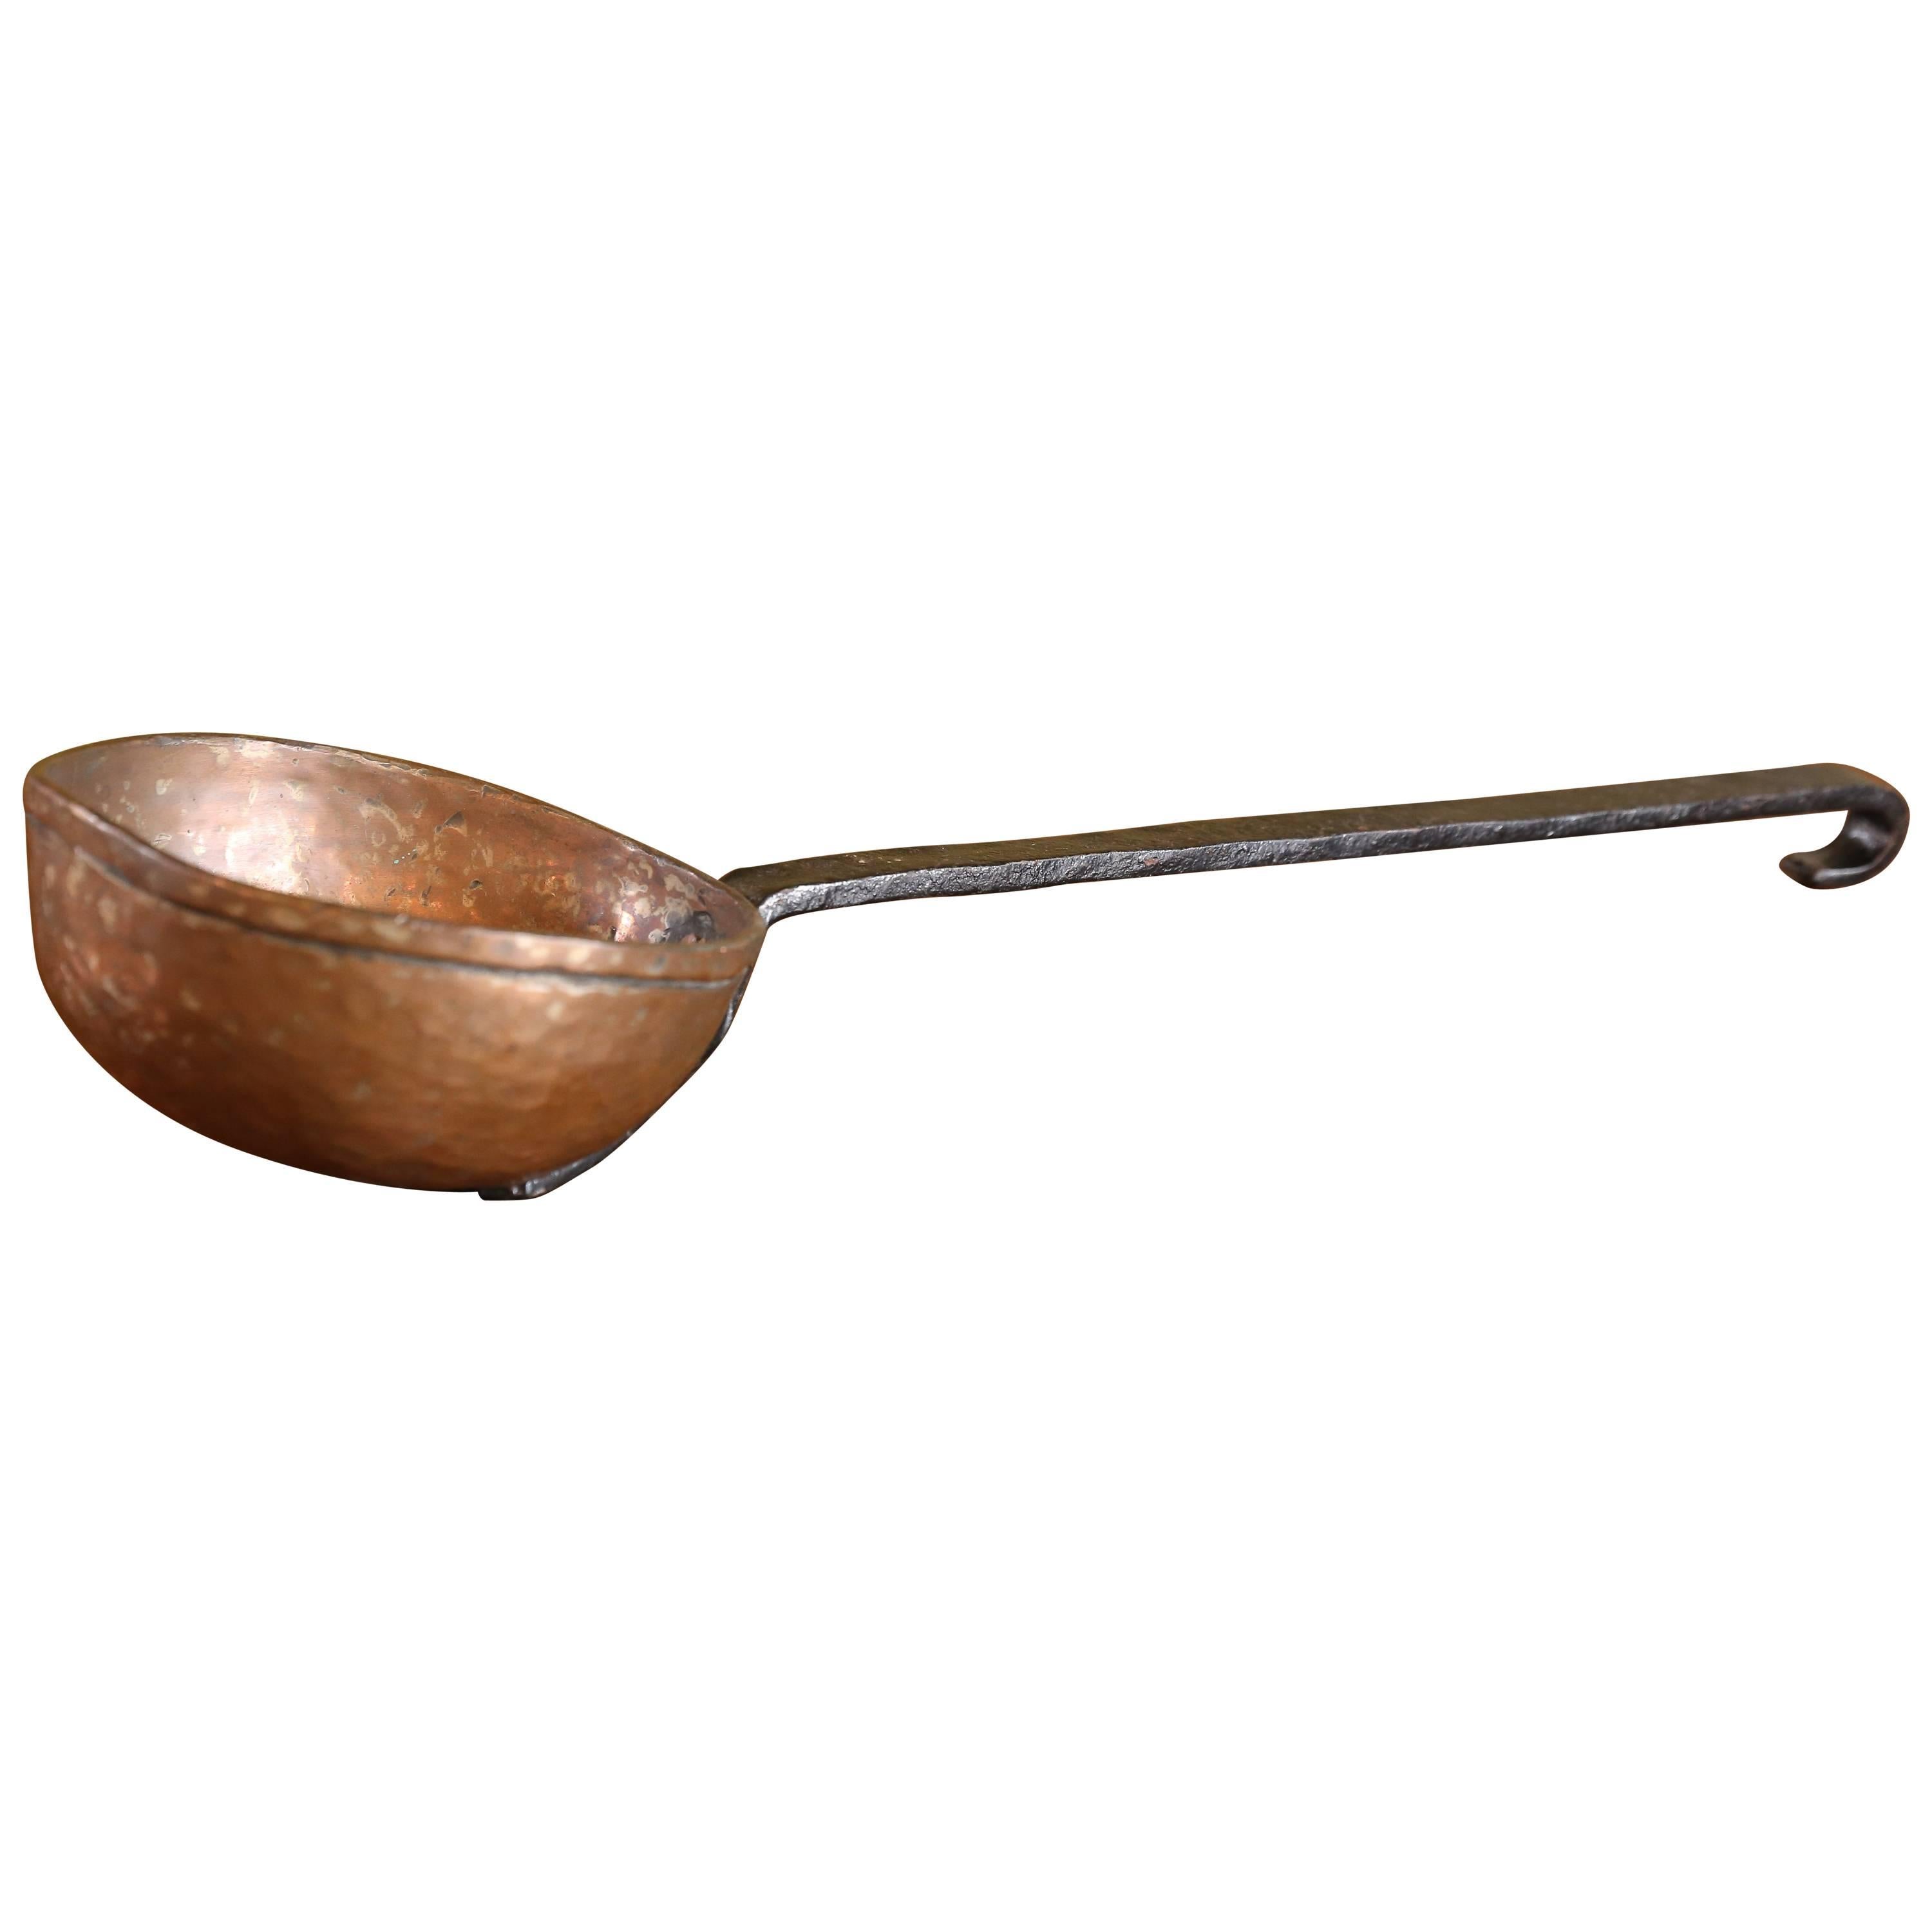 Over-Sized Antique Copper and Iron Ladle